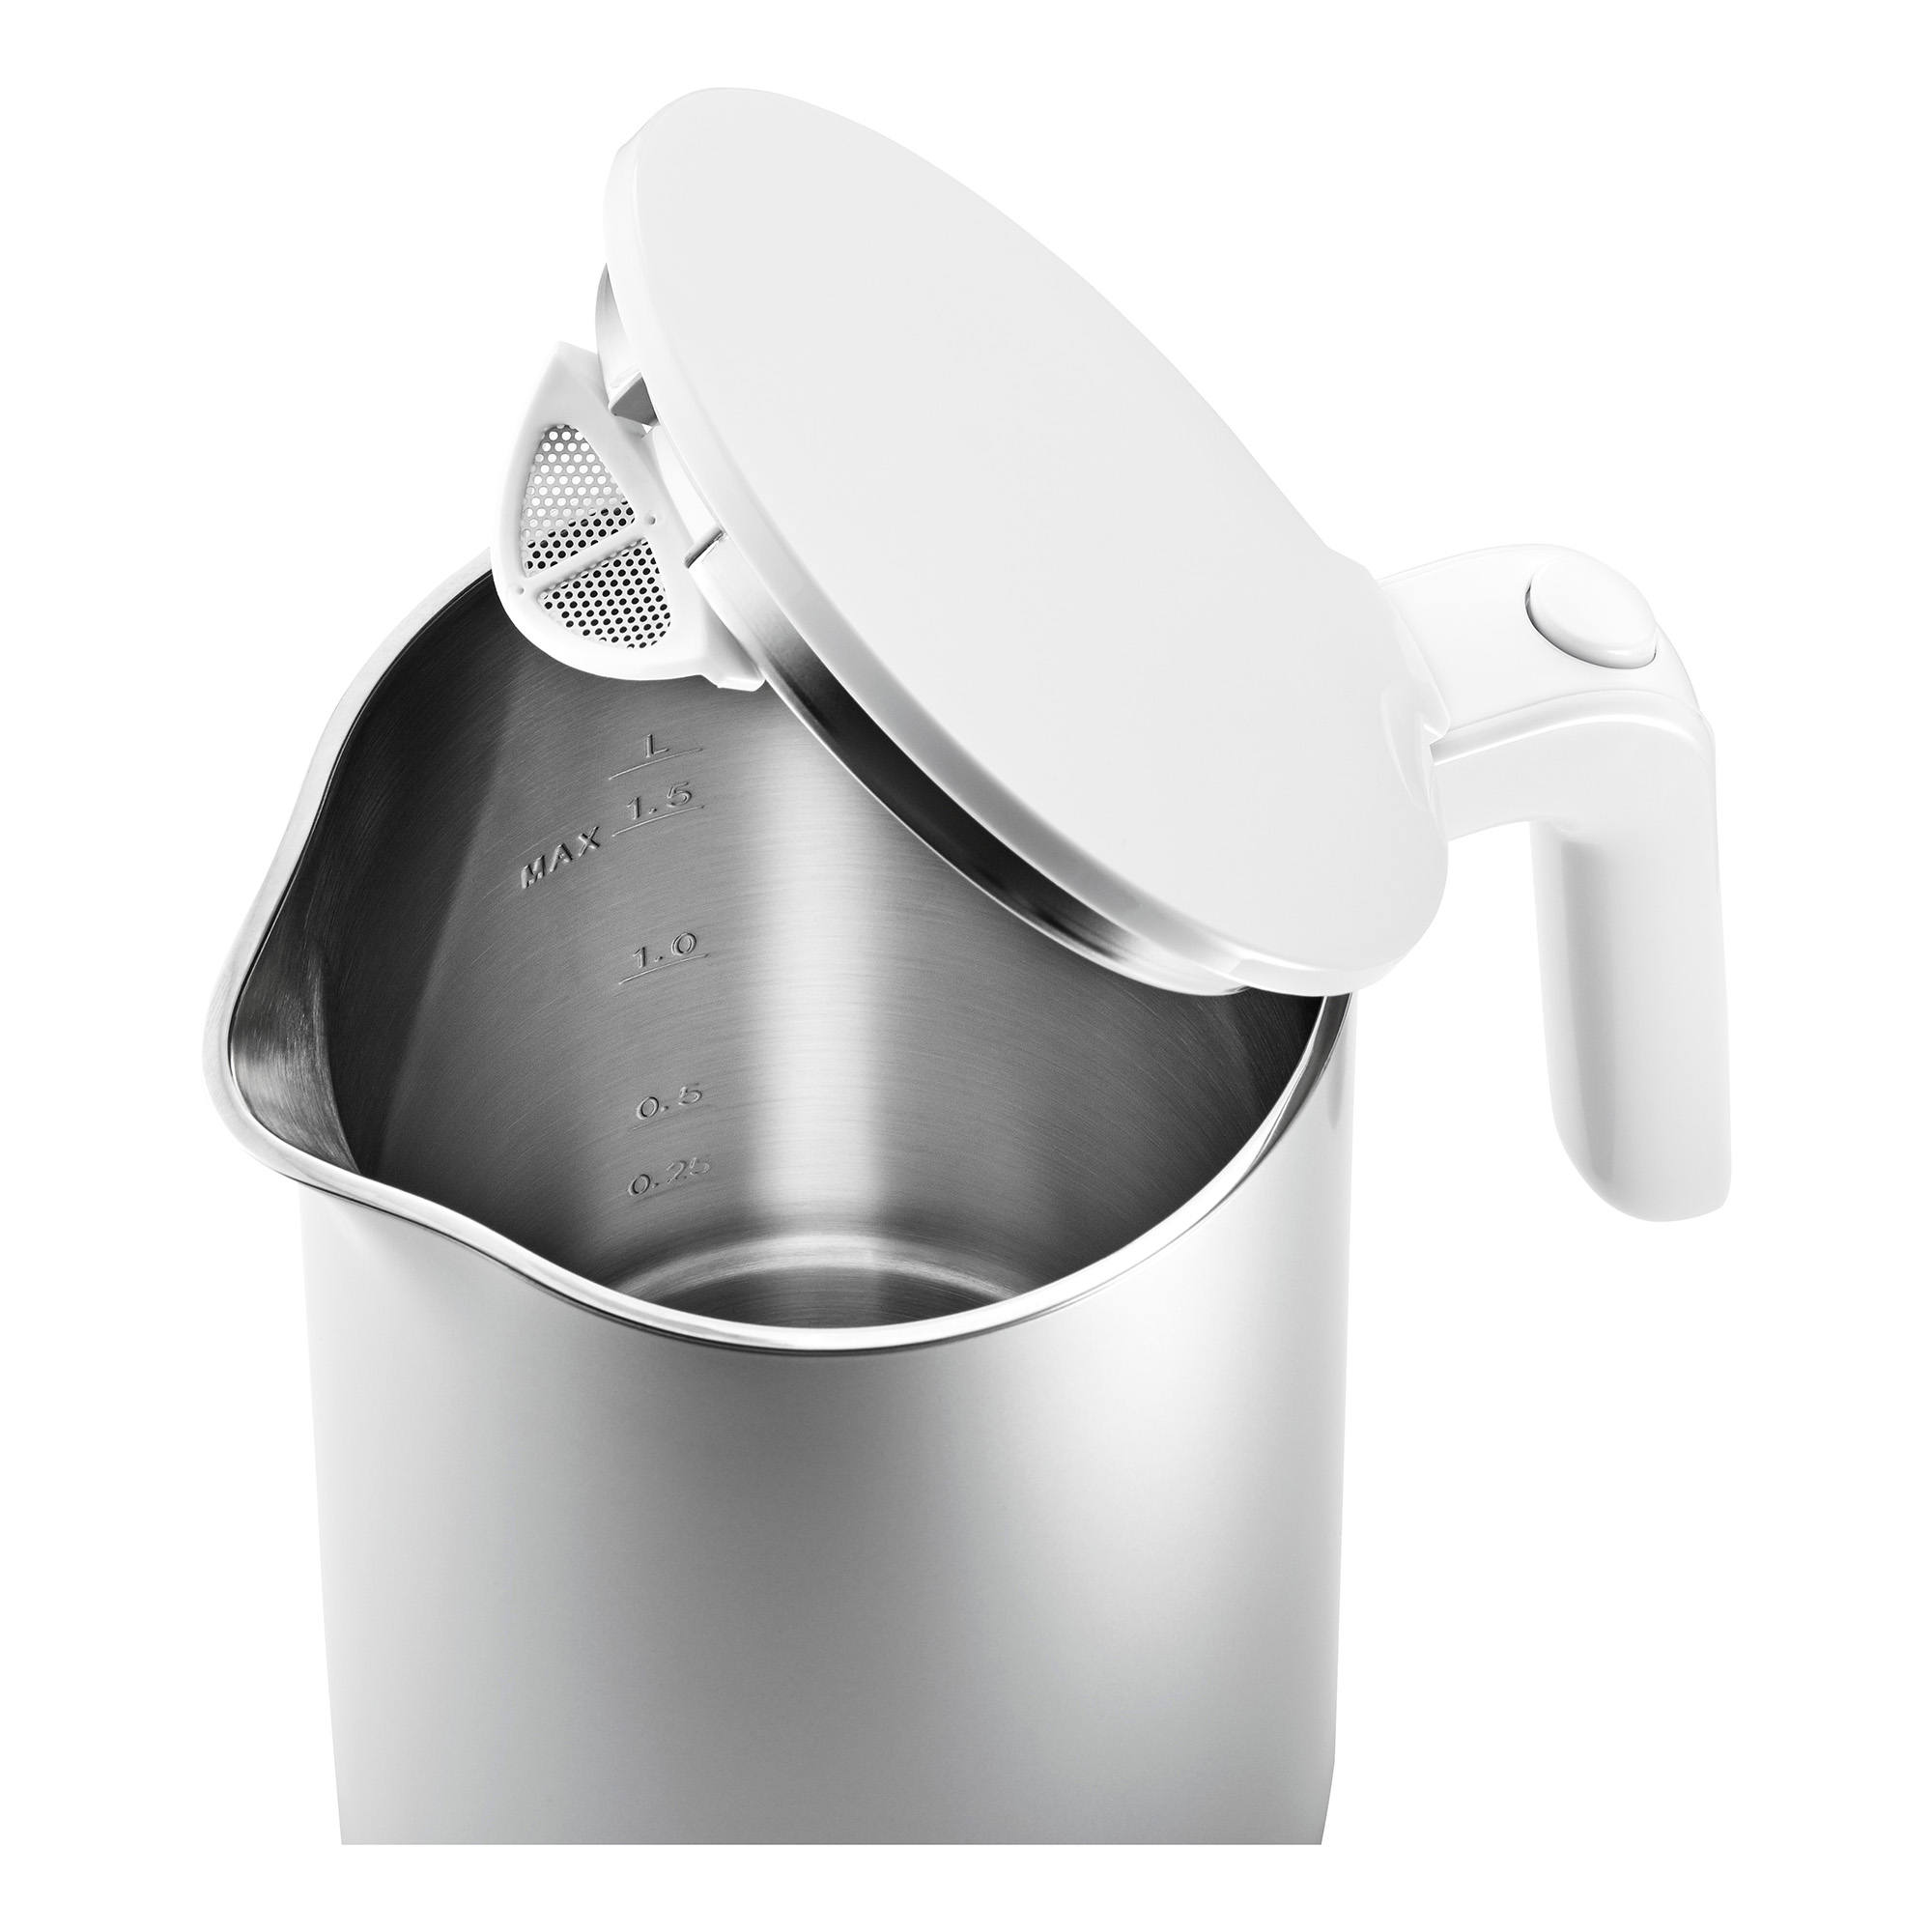 ZWILLING Enfinigy 1.5 l, Cool Touch Kettle Pro - Silver - Refurbished